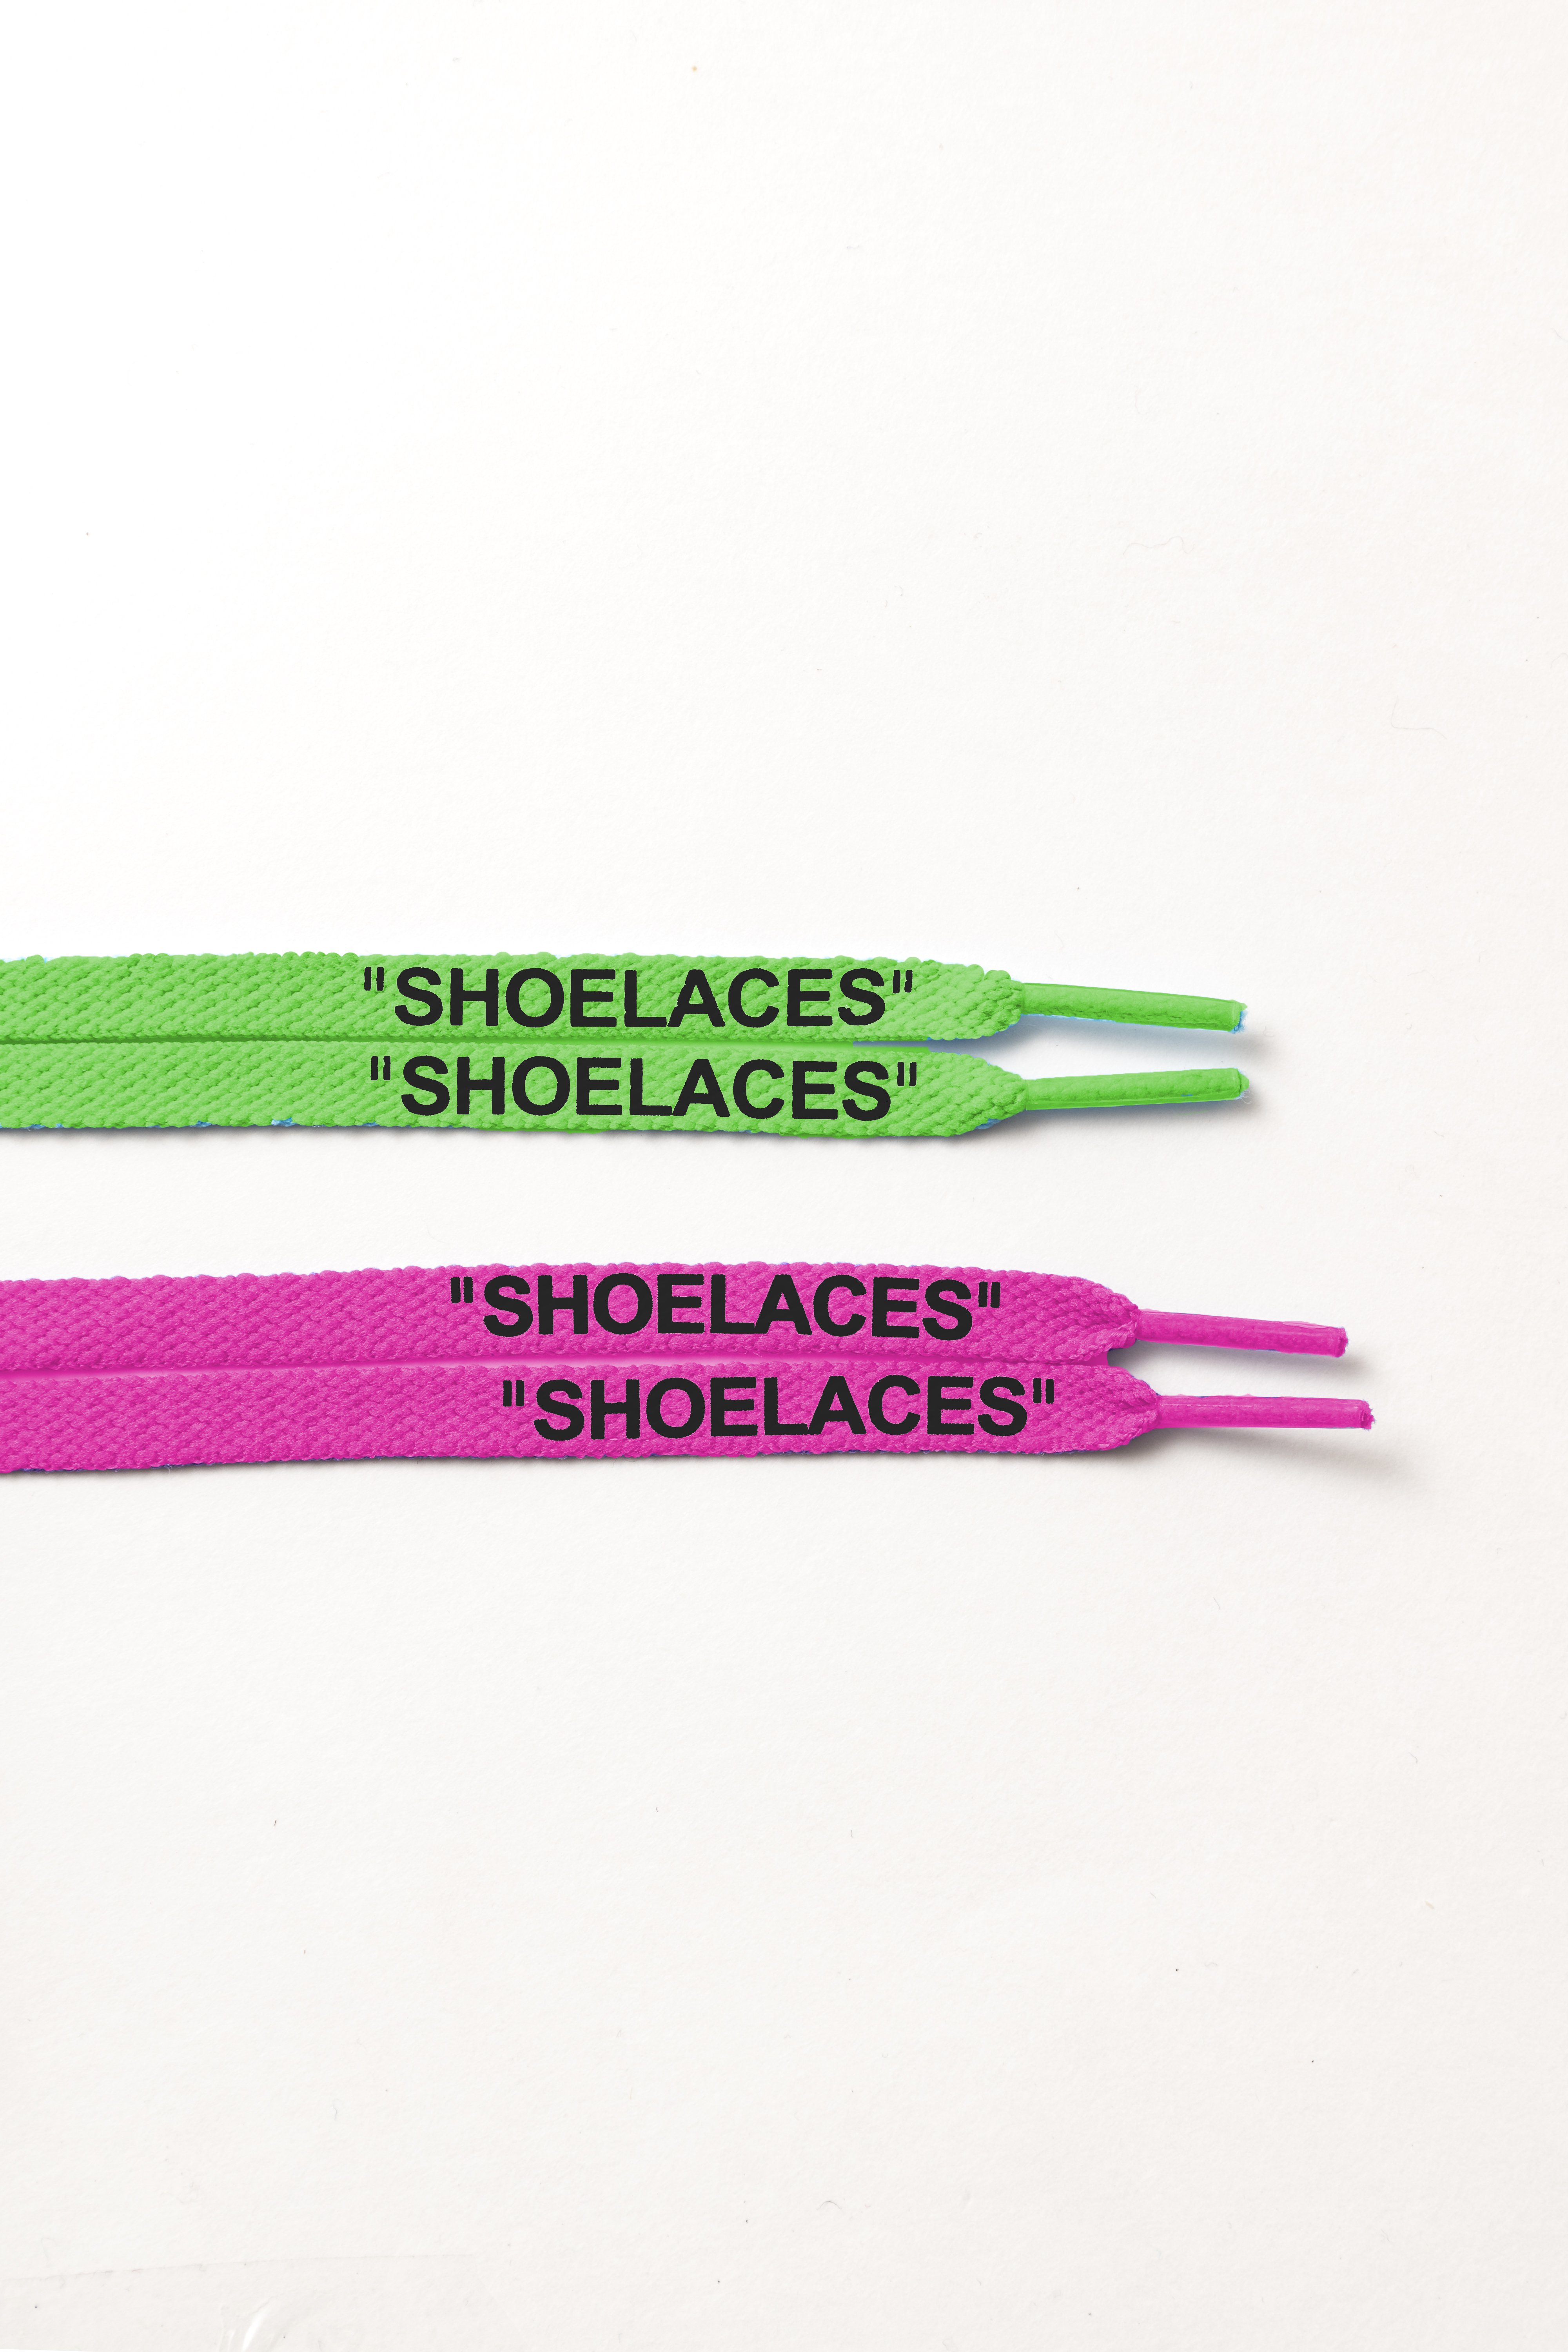 off white shoelaces real